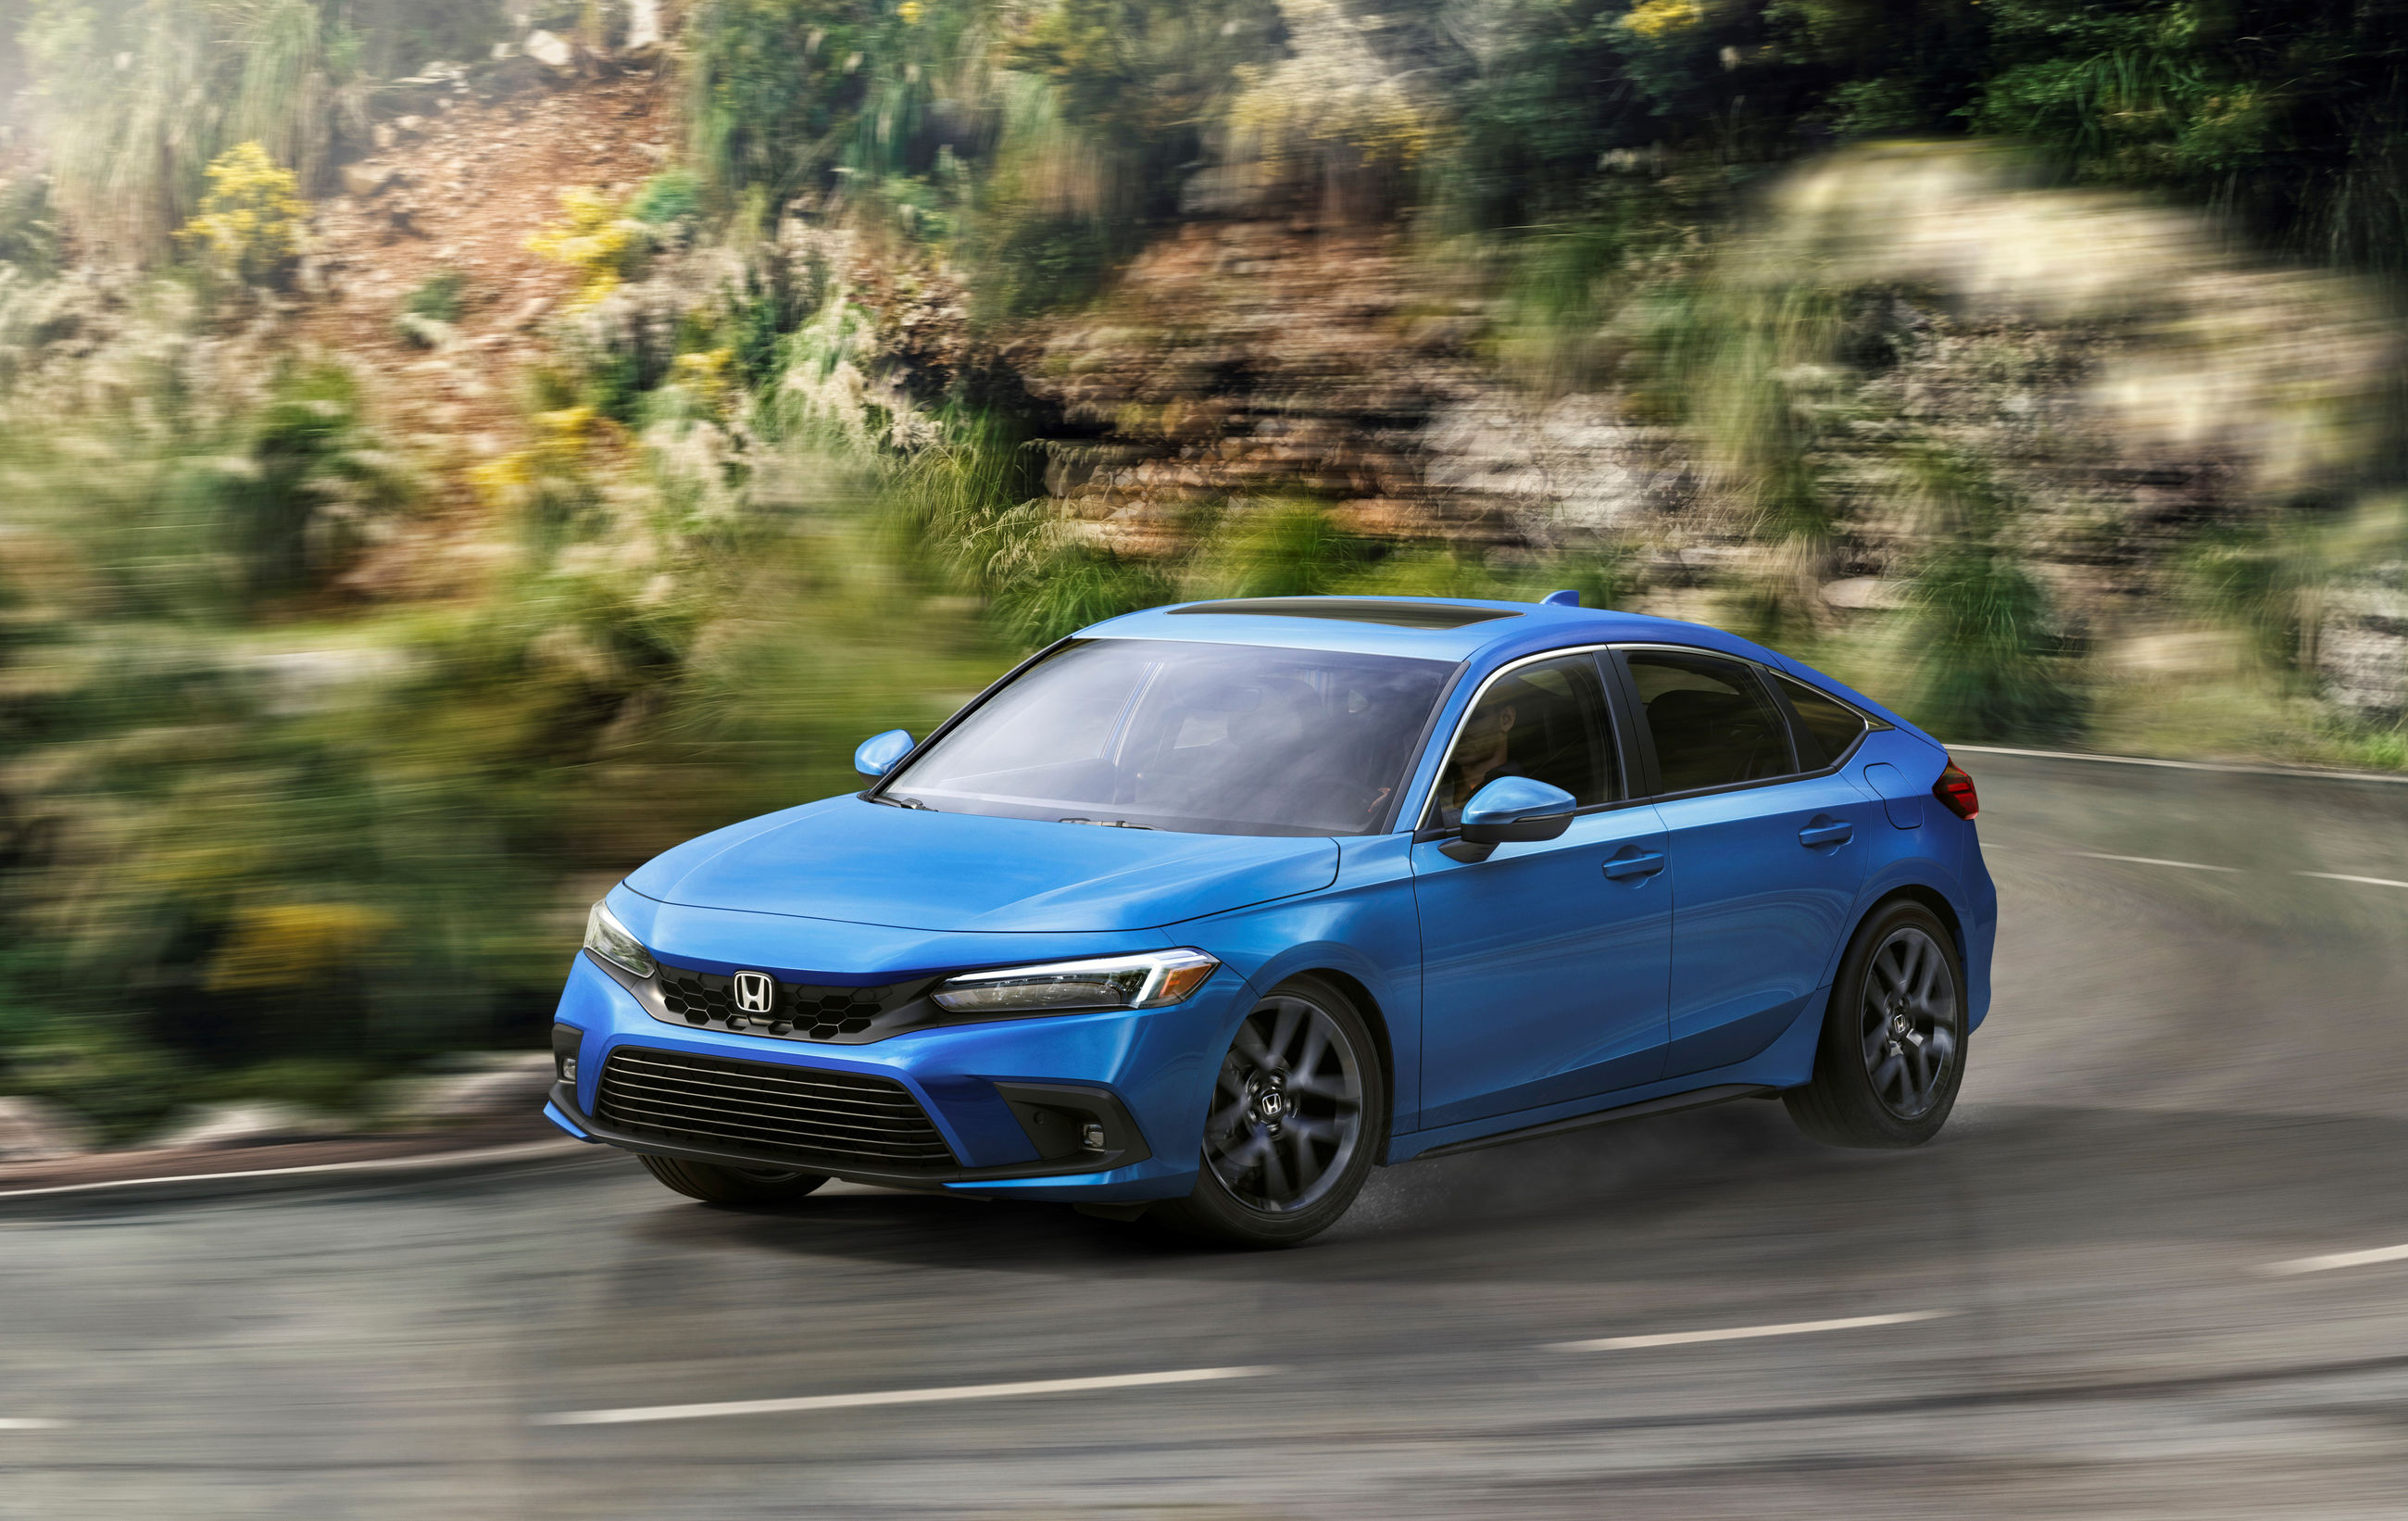 This Is The 2022 Honda Civic Hatchback – A Manual Transmission Is Available